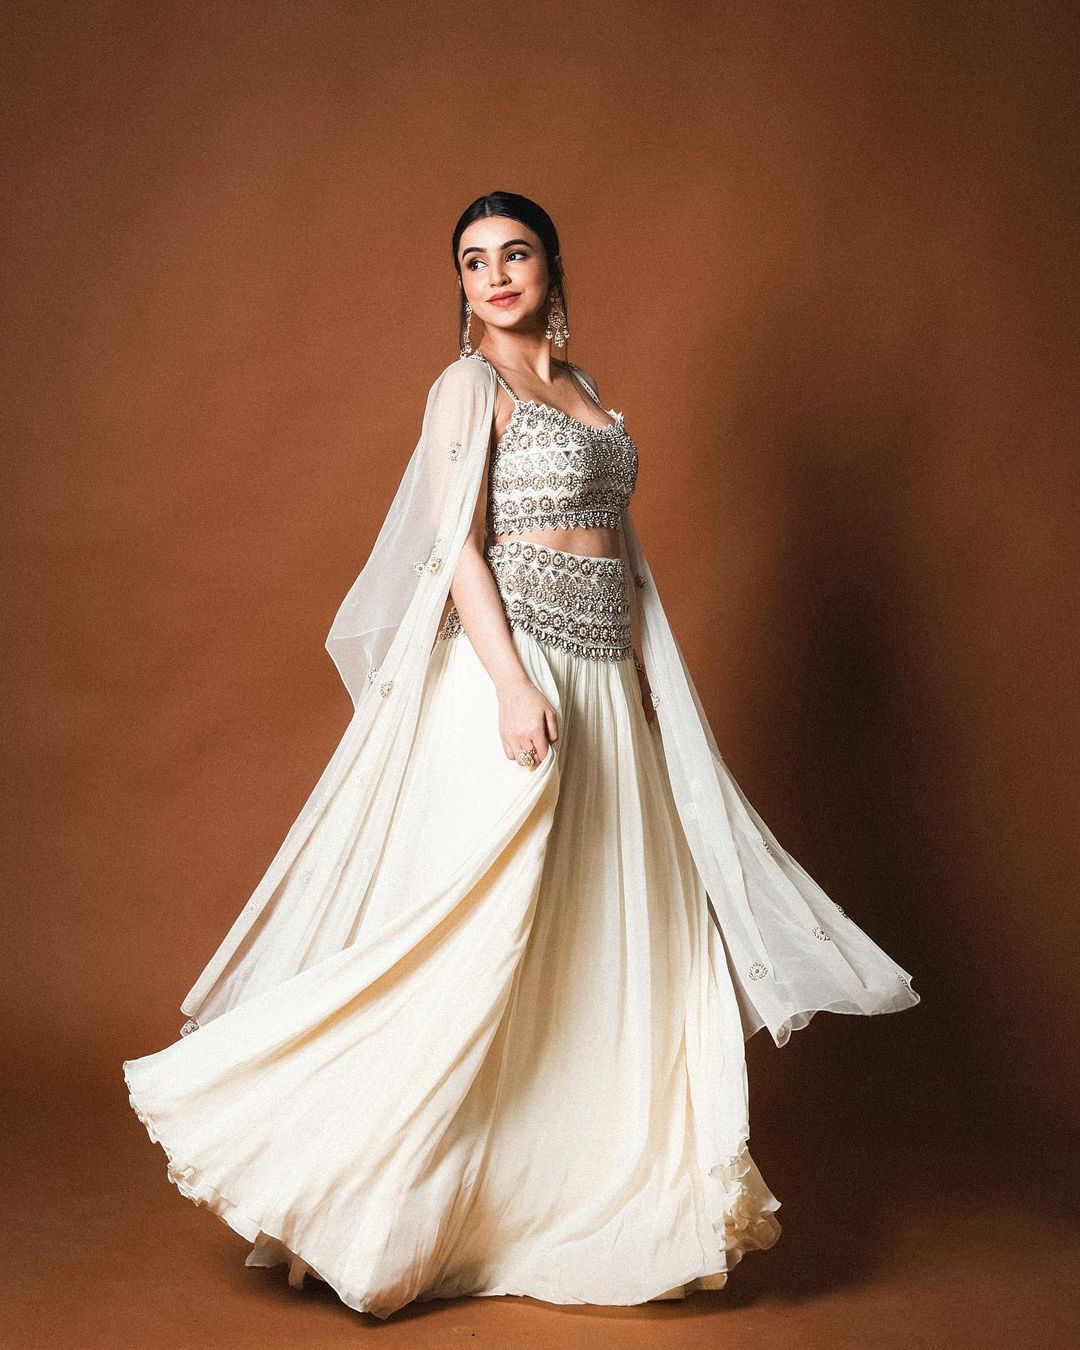 Ankita Sharma in Ivory Hand-embroidered Tulle Cape and Georgette skirt